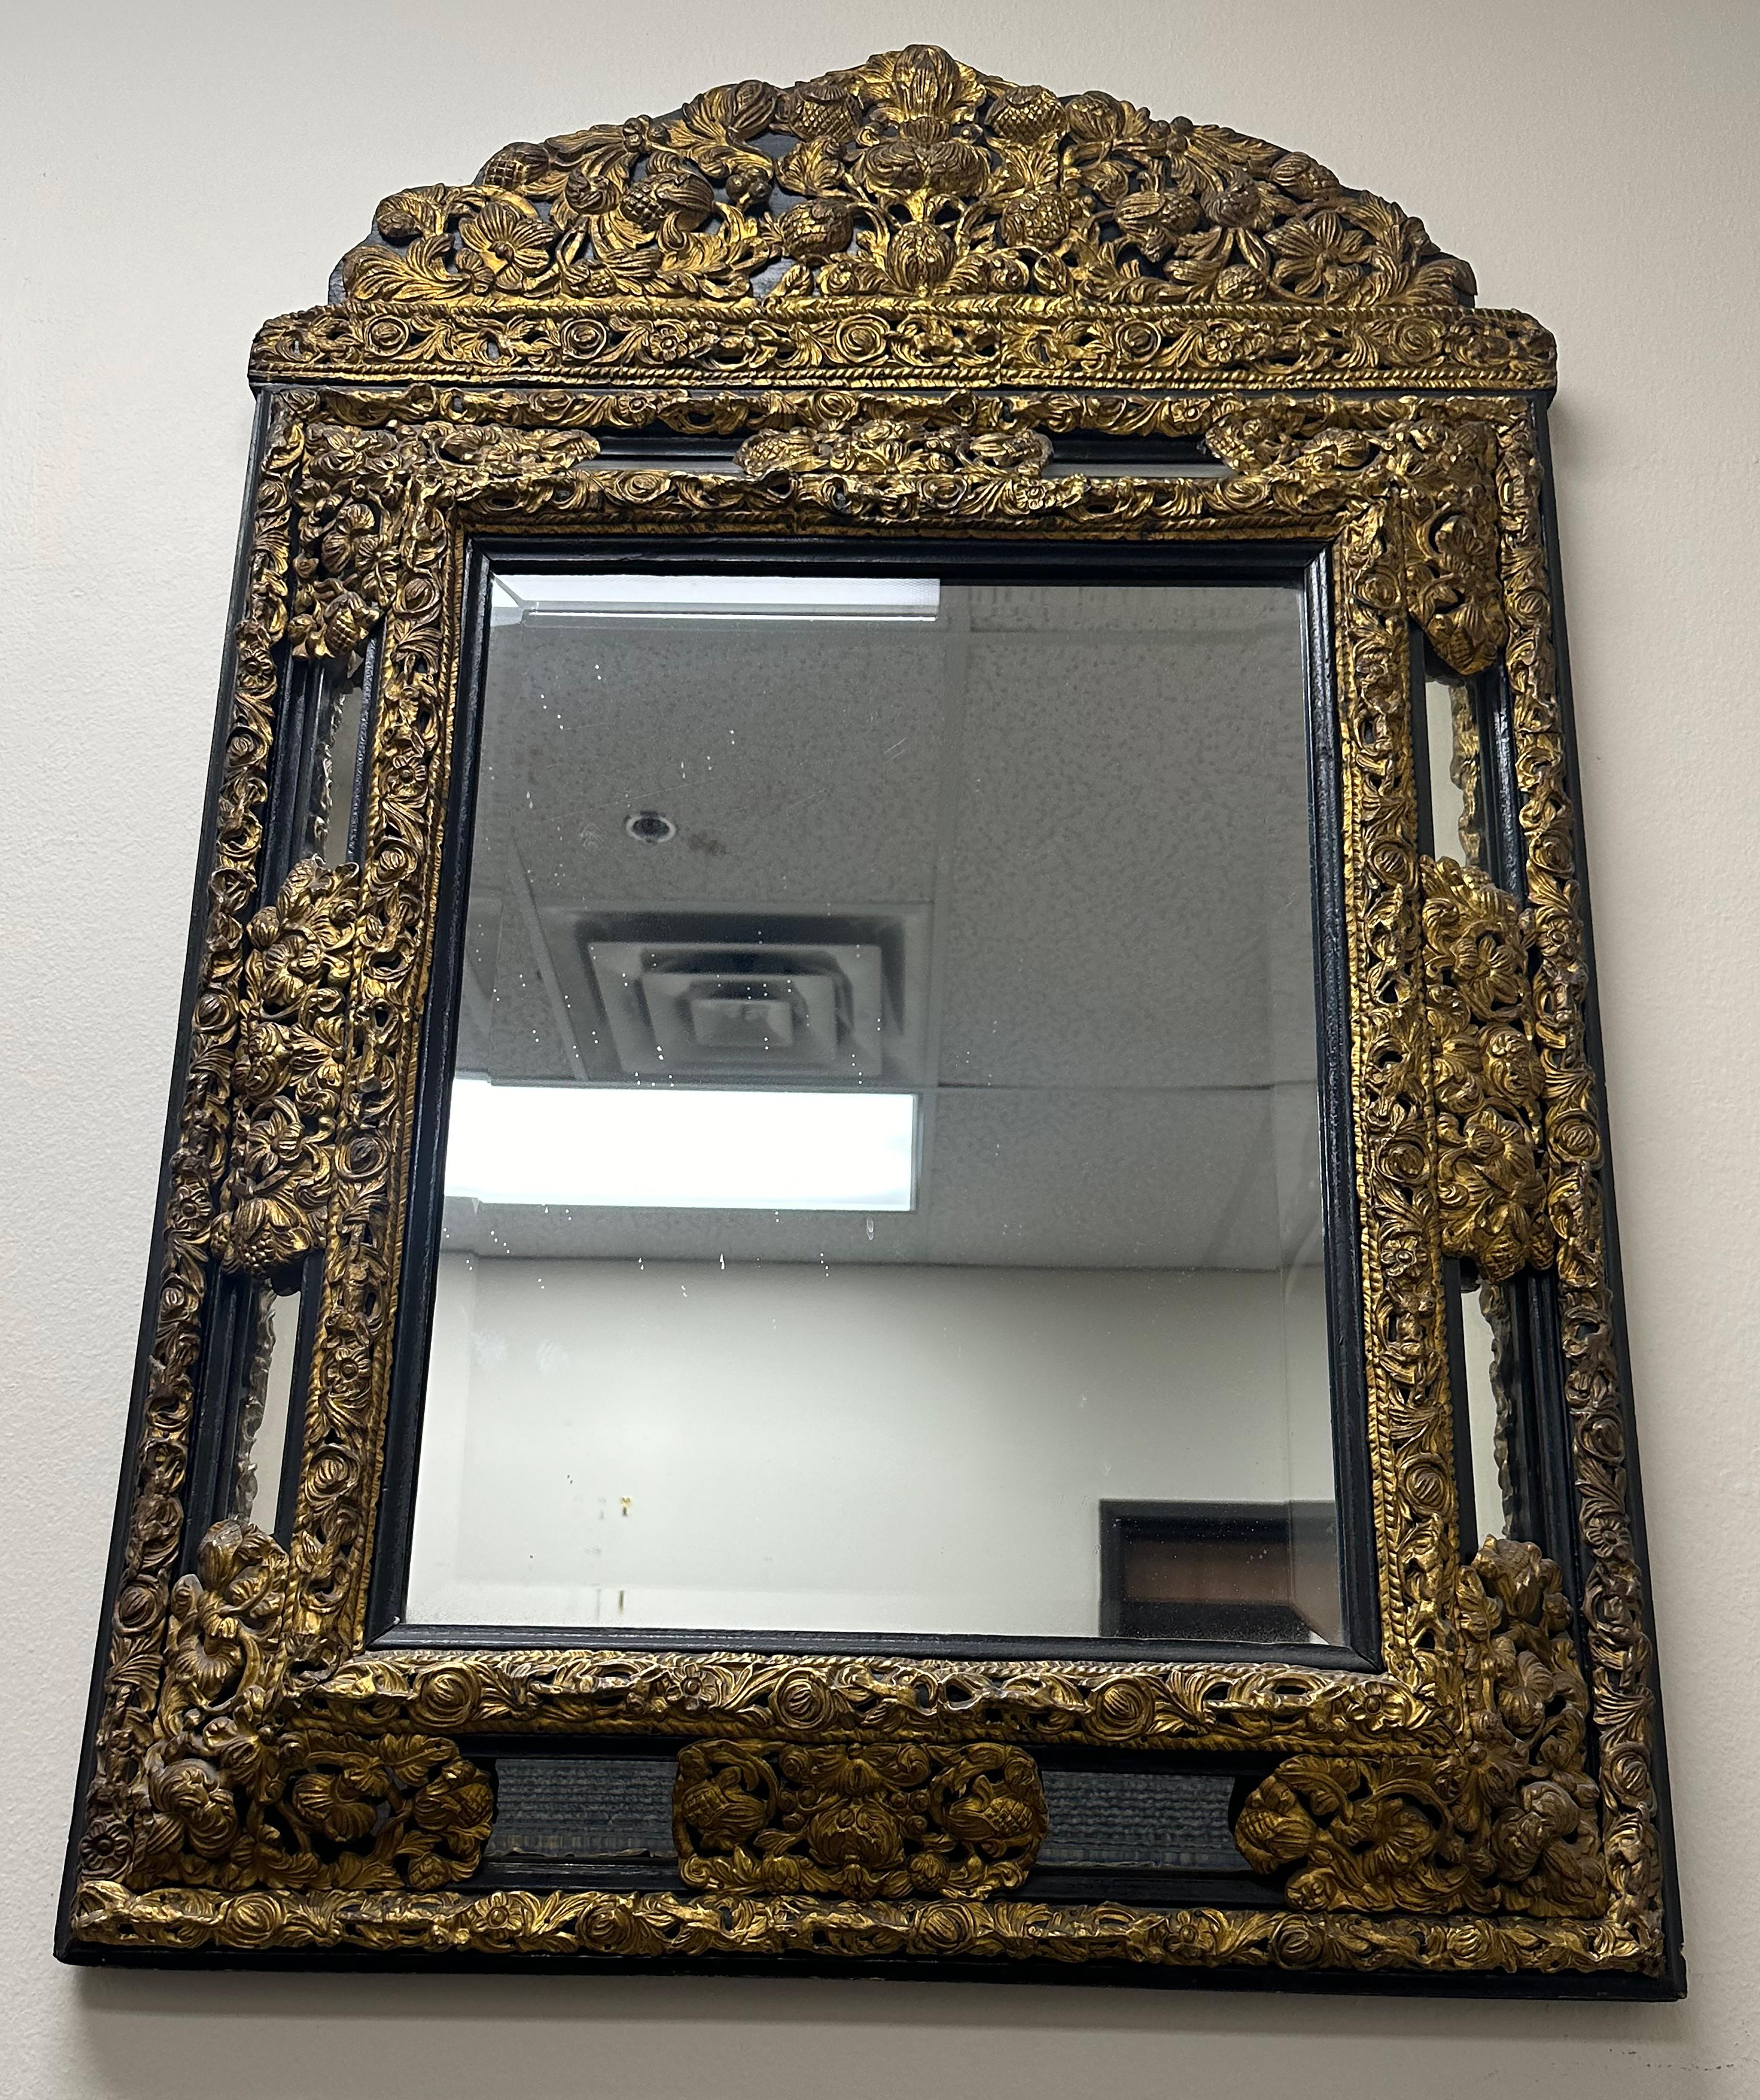 Dutch embossed brass and ebony mirror with floral motifs, beveled edge glass in the centre and 8 rectangular plates surrounding.